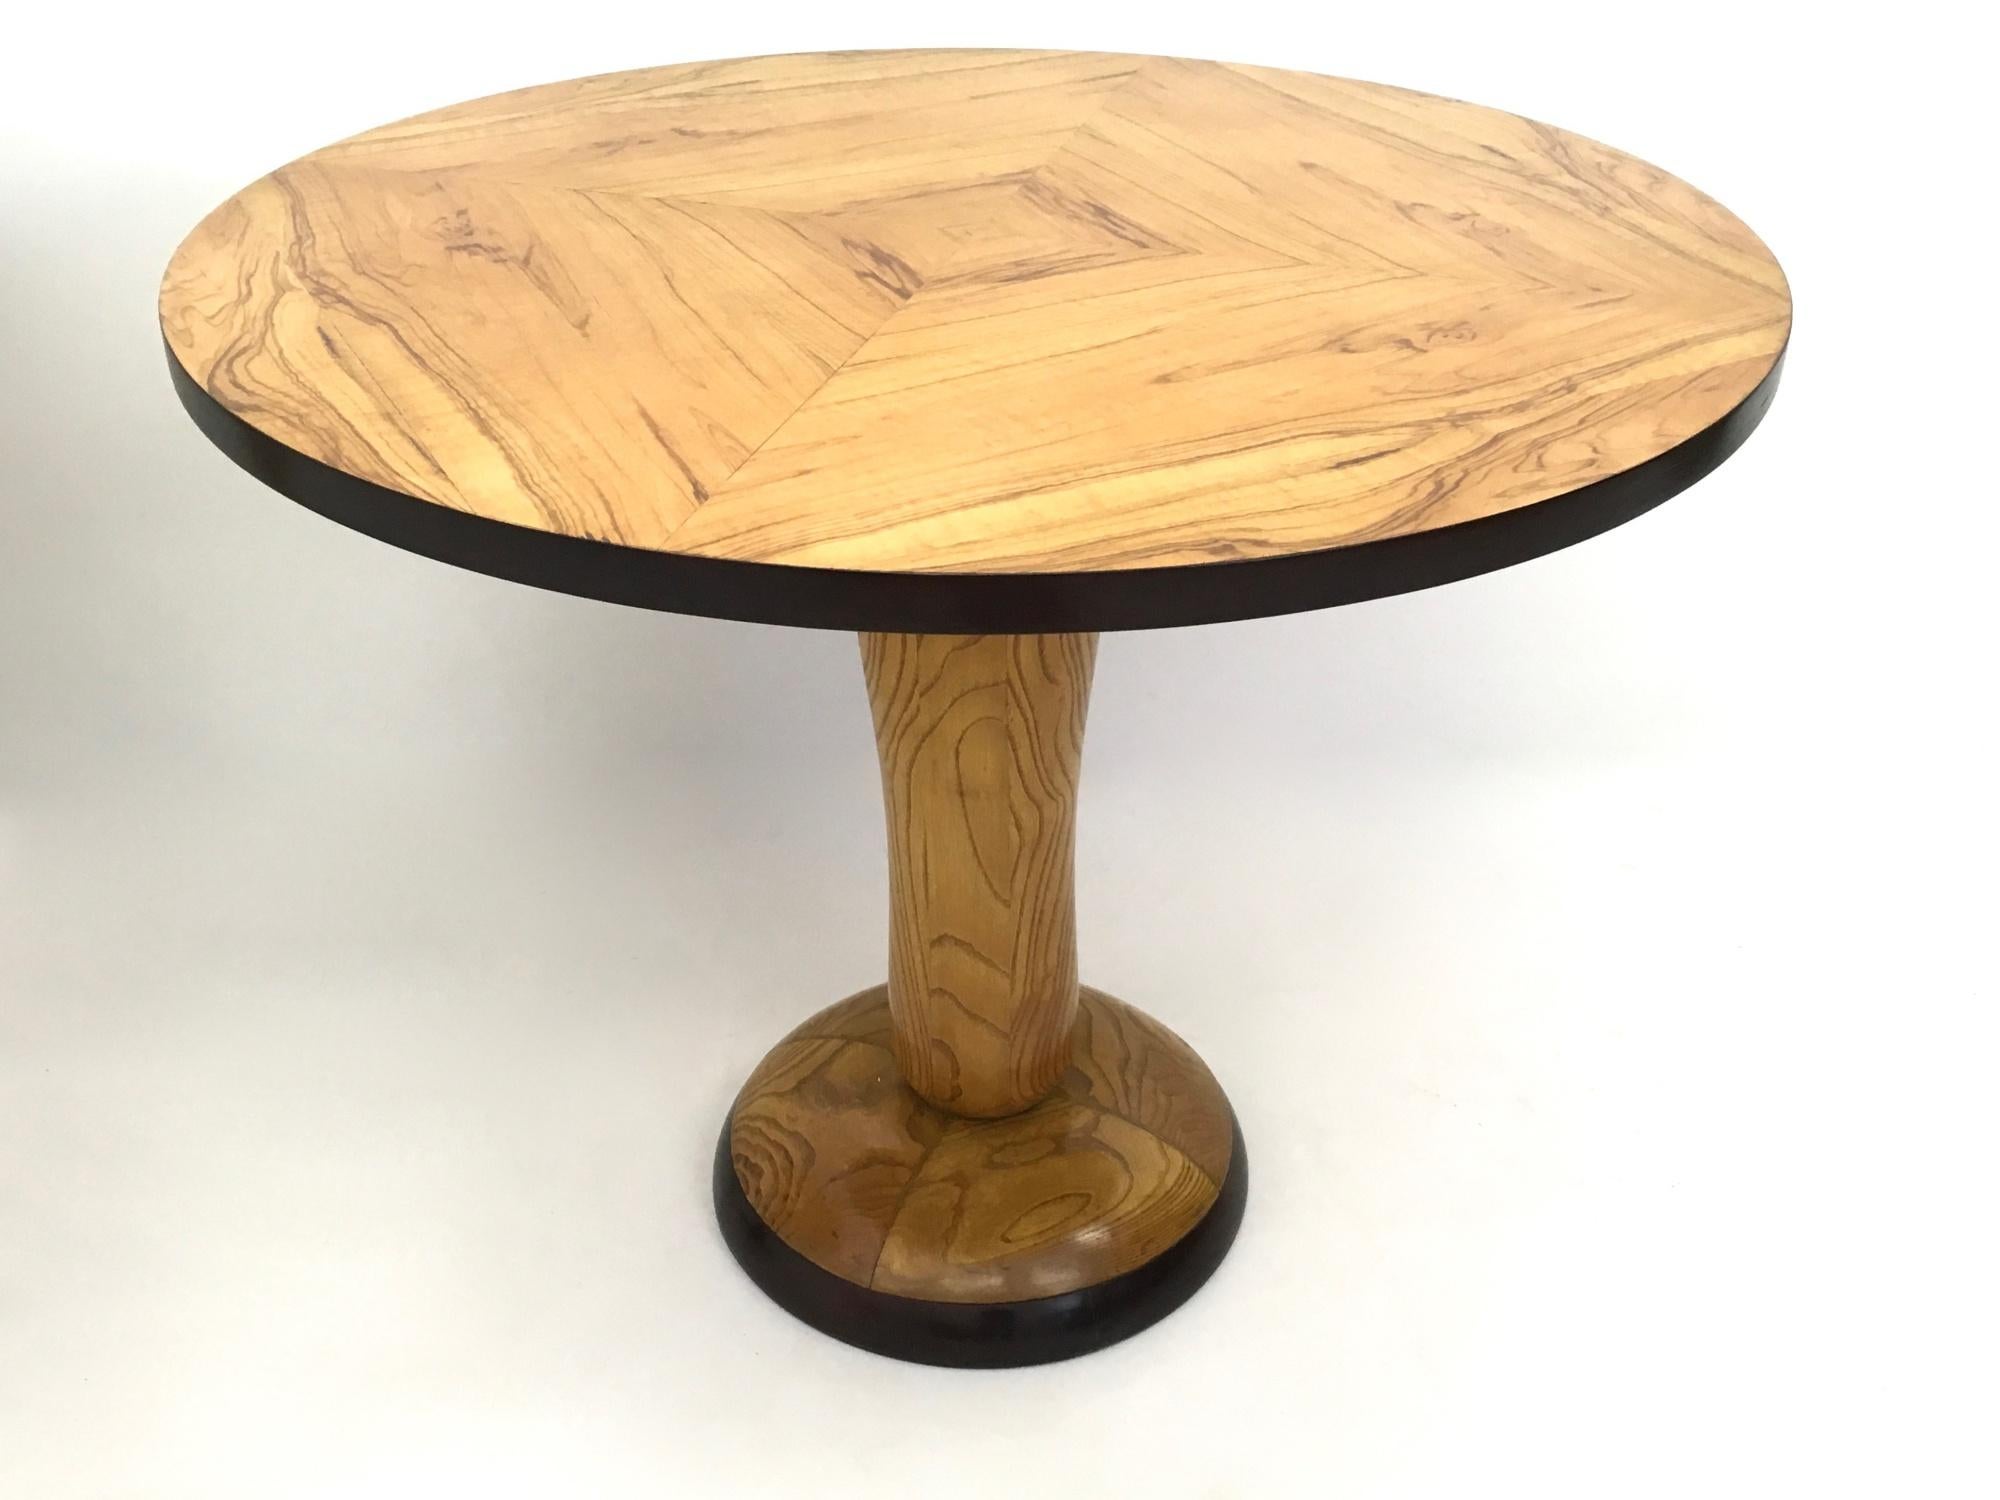 Italian Pair of Midcentury Round Olive Wood and Ash Dining Table, Italy, 1940s